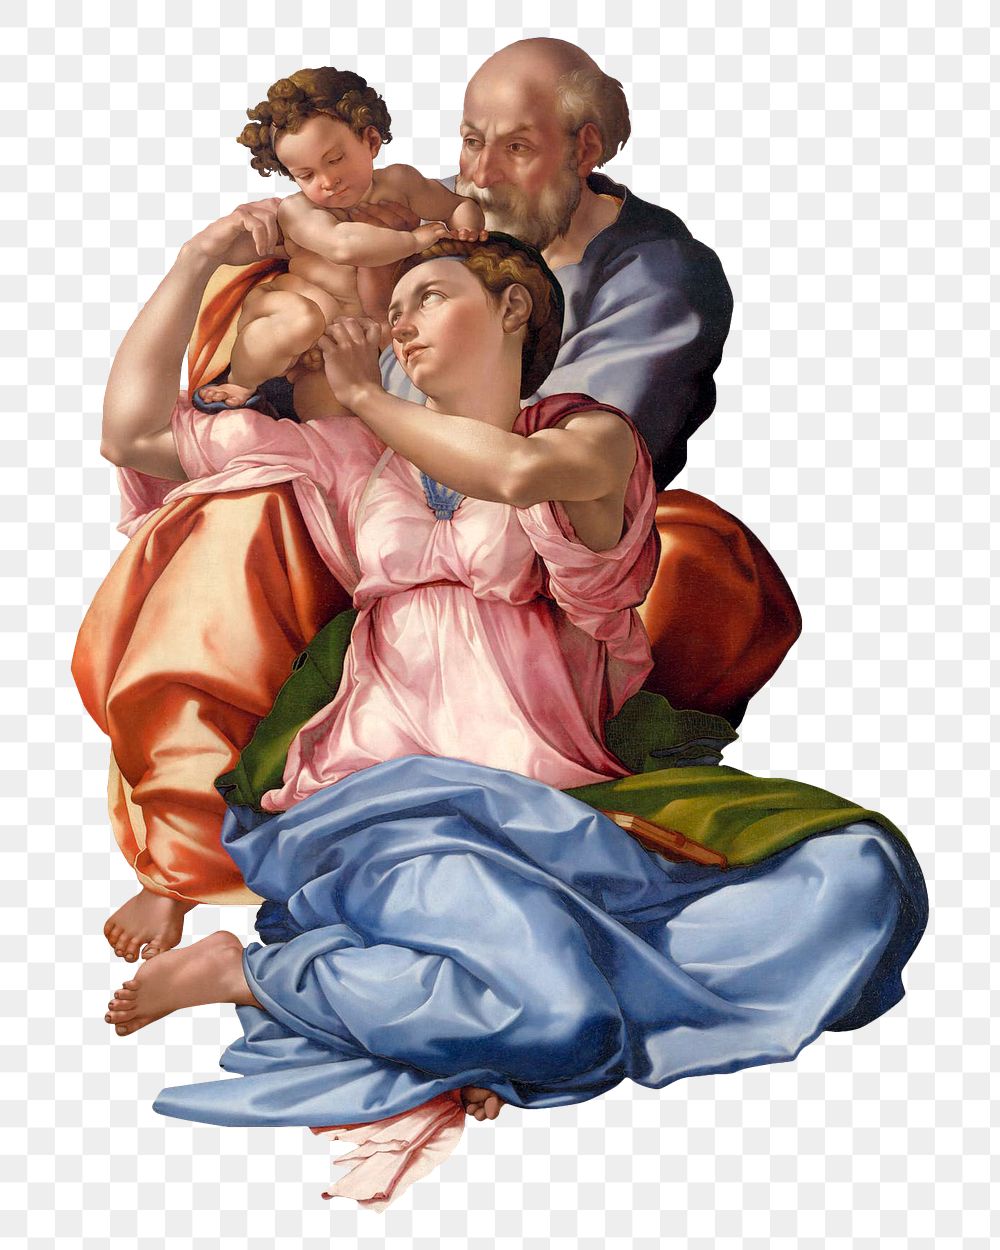 The holy family png sticker, Michelangelo-inspired artwork, transparent background, remixed by rawpixel